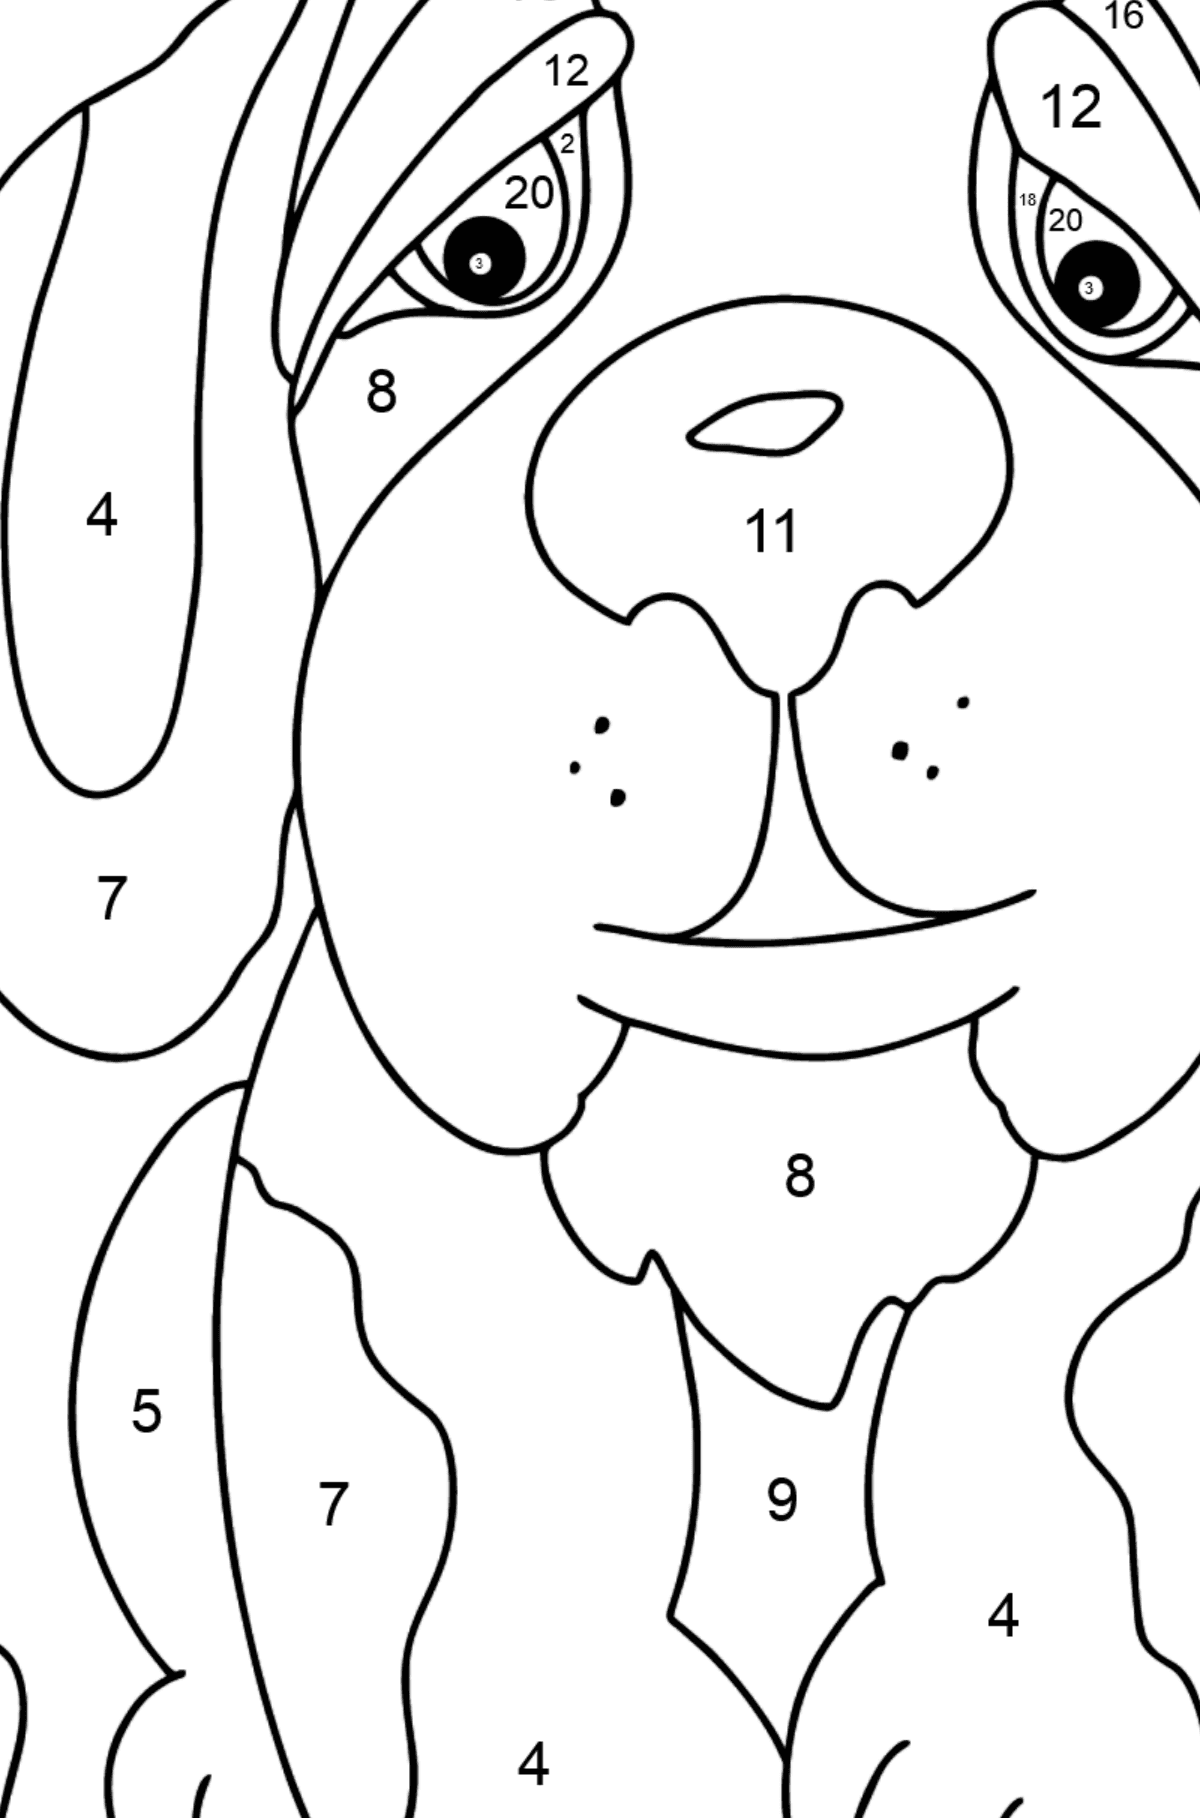 Coloring Page - A Dog is Watching a Butterfly - Coloring by Numbers for Kids